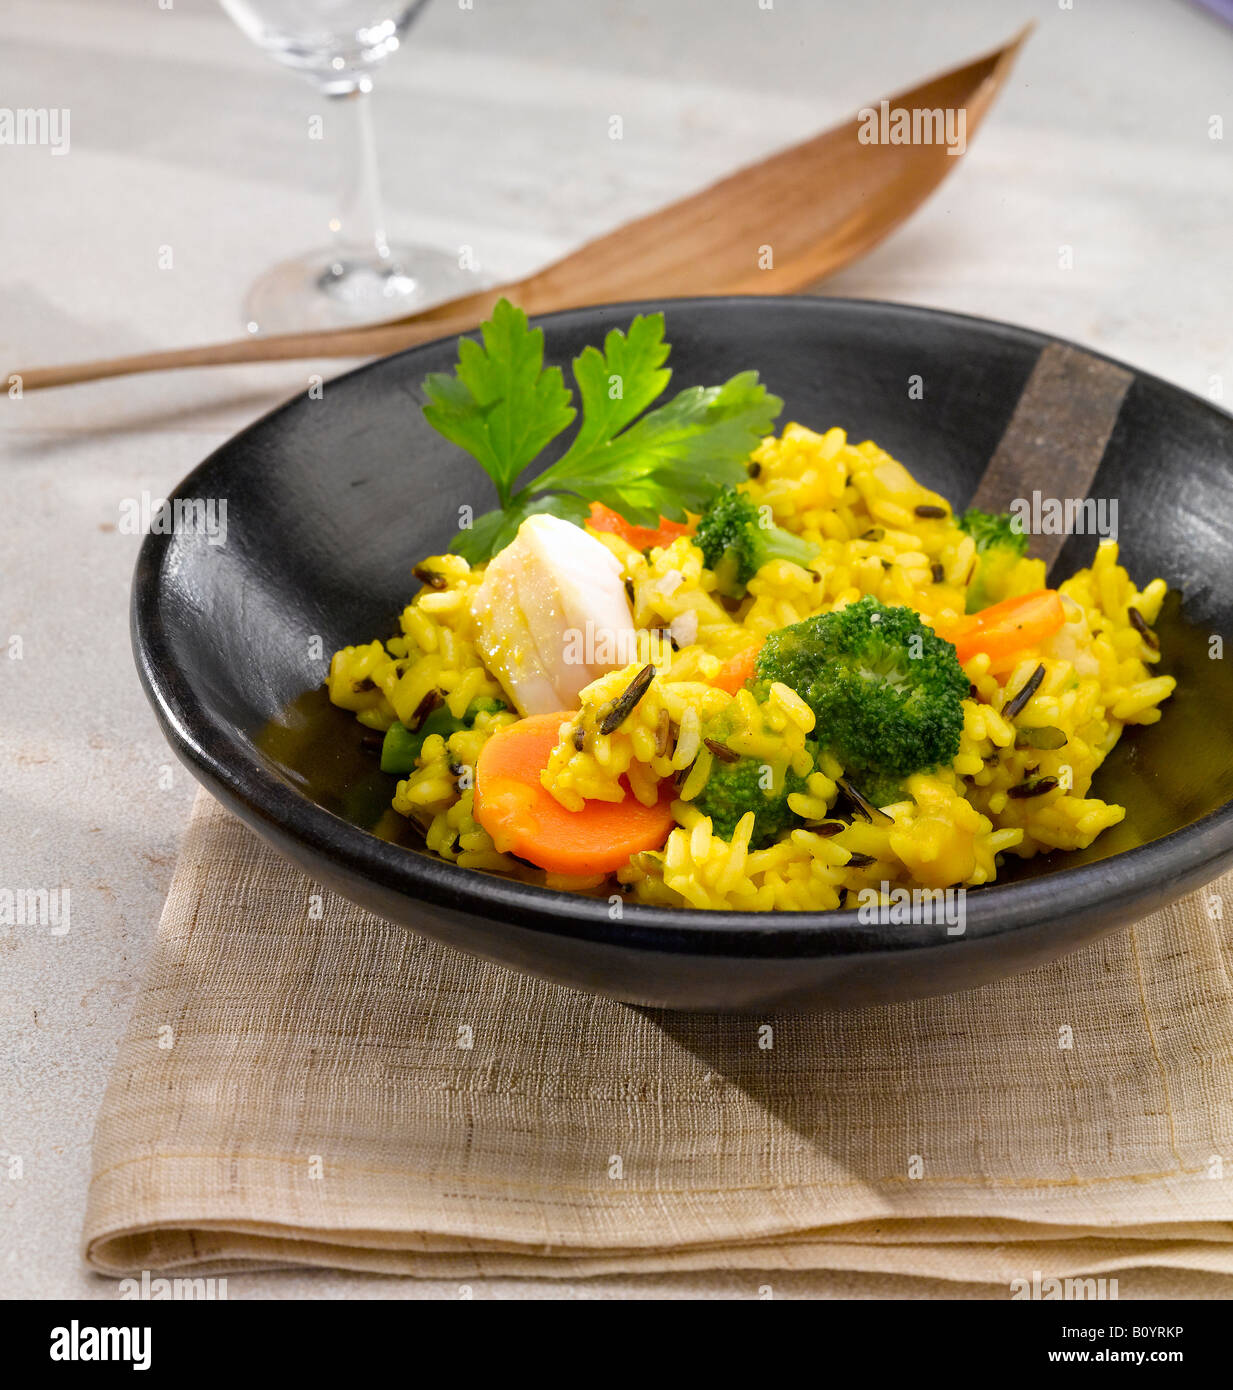 Curry dish in wooden bowl Stock Photo